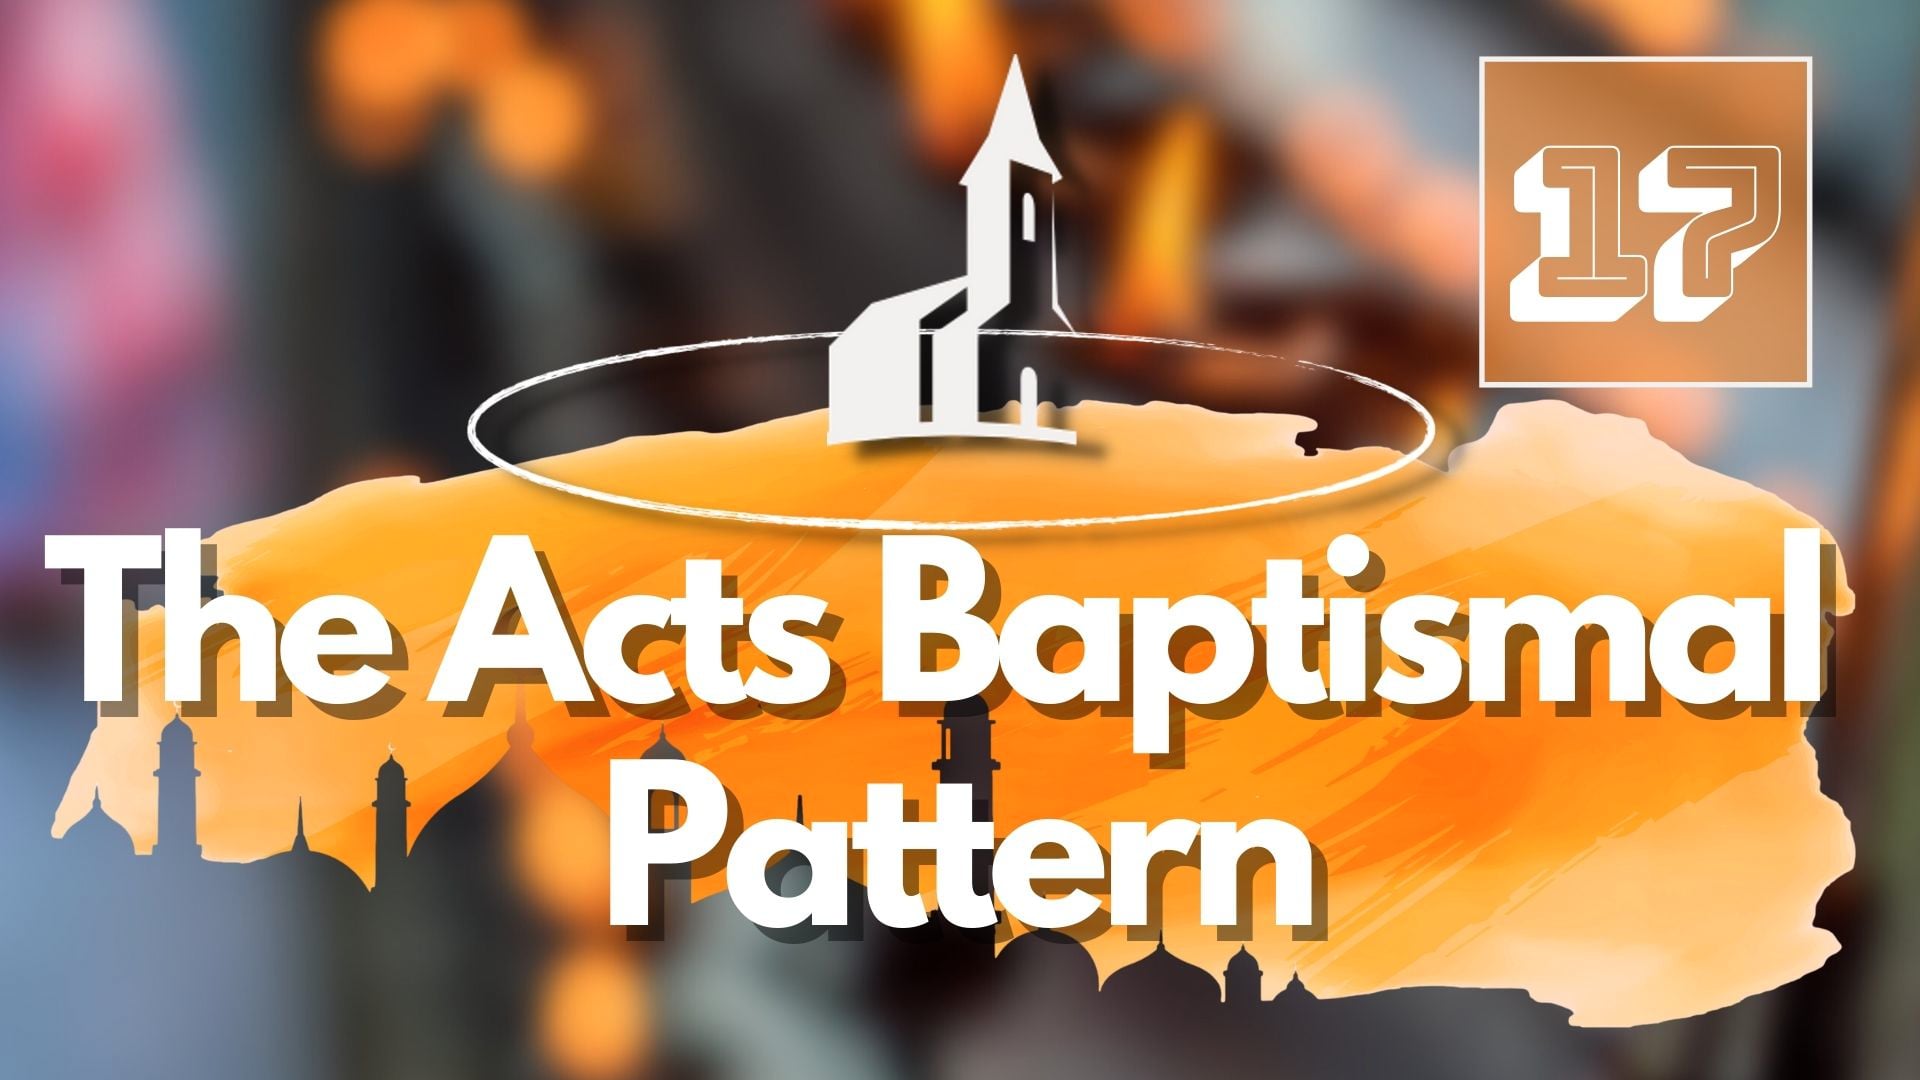 17. The Acts Baptismal Pattern – Mike Shipman